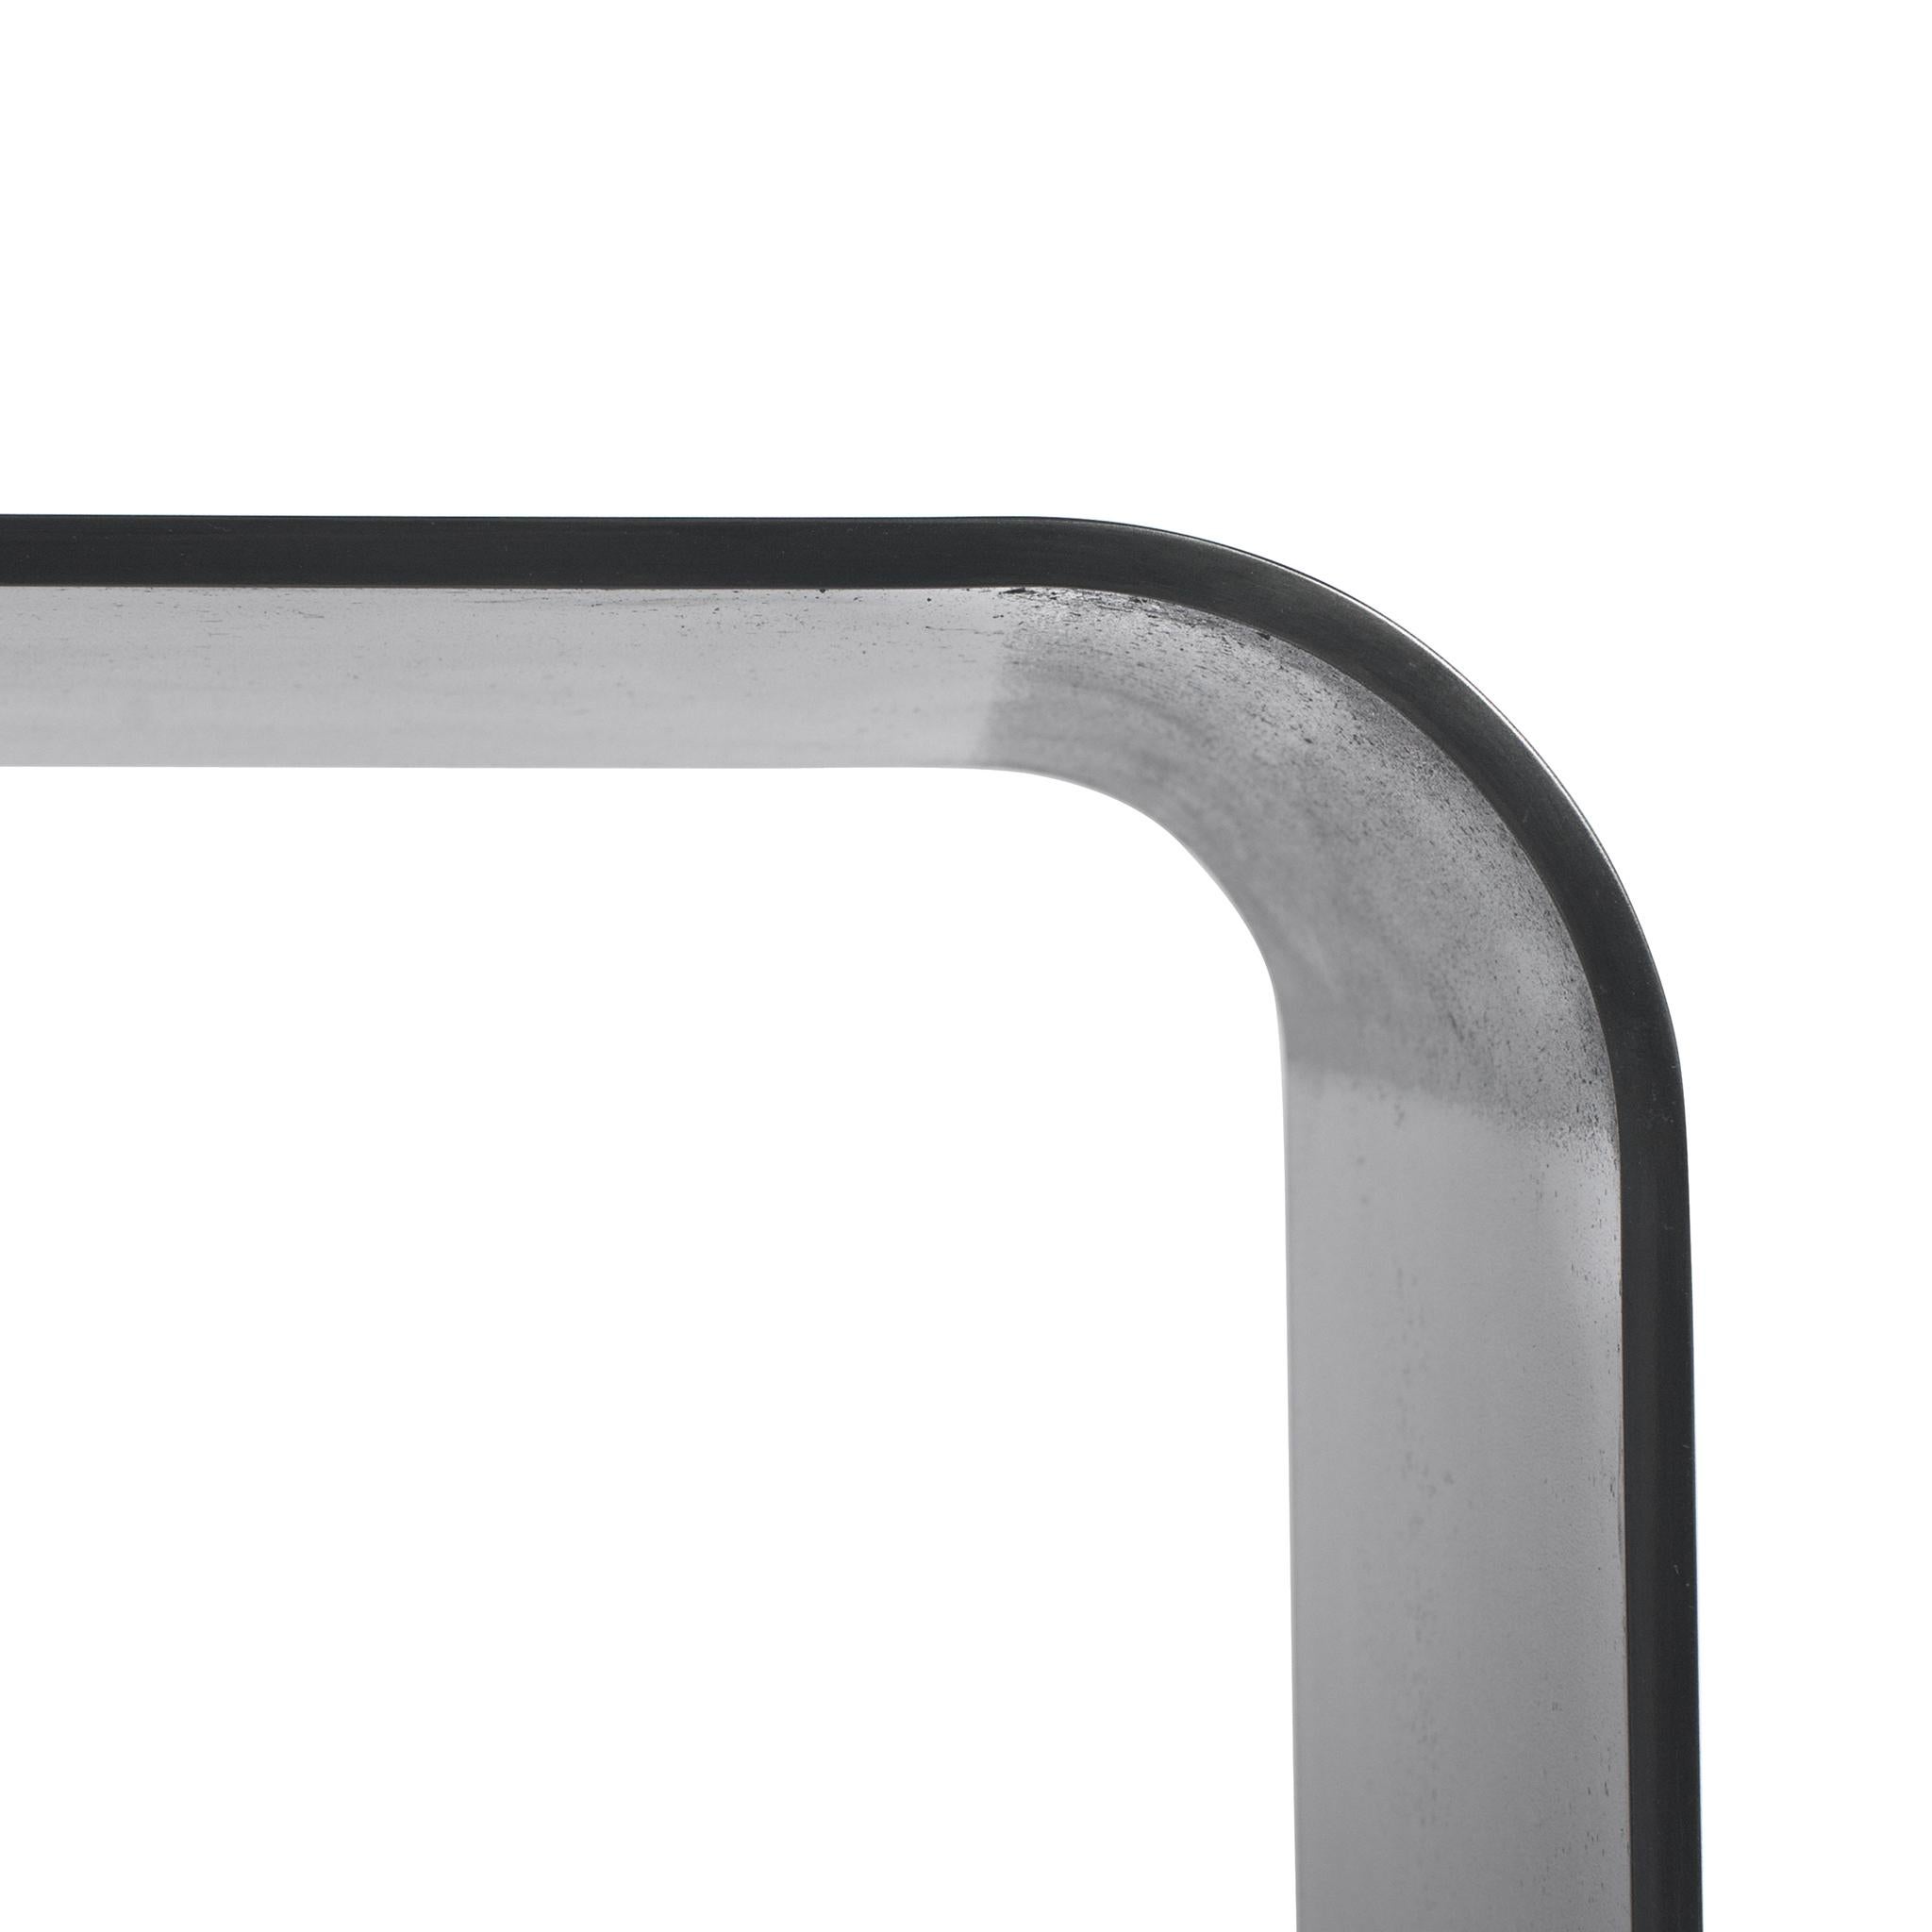 The Lin bench is an exploration into the finishes possible with steel. It’s simple radius curves makes the Lin bench a clean, Minimalist piece. At closer glance the rich texture of hot rolled steel are stunning and are accentuated by its blackened